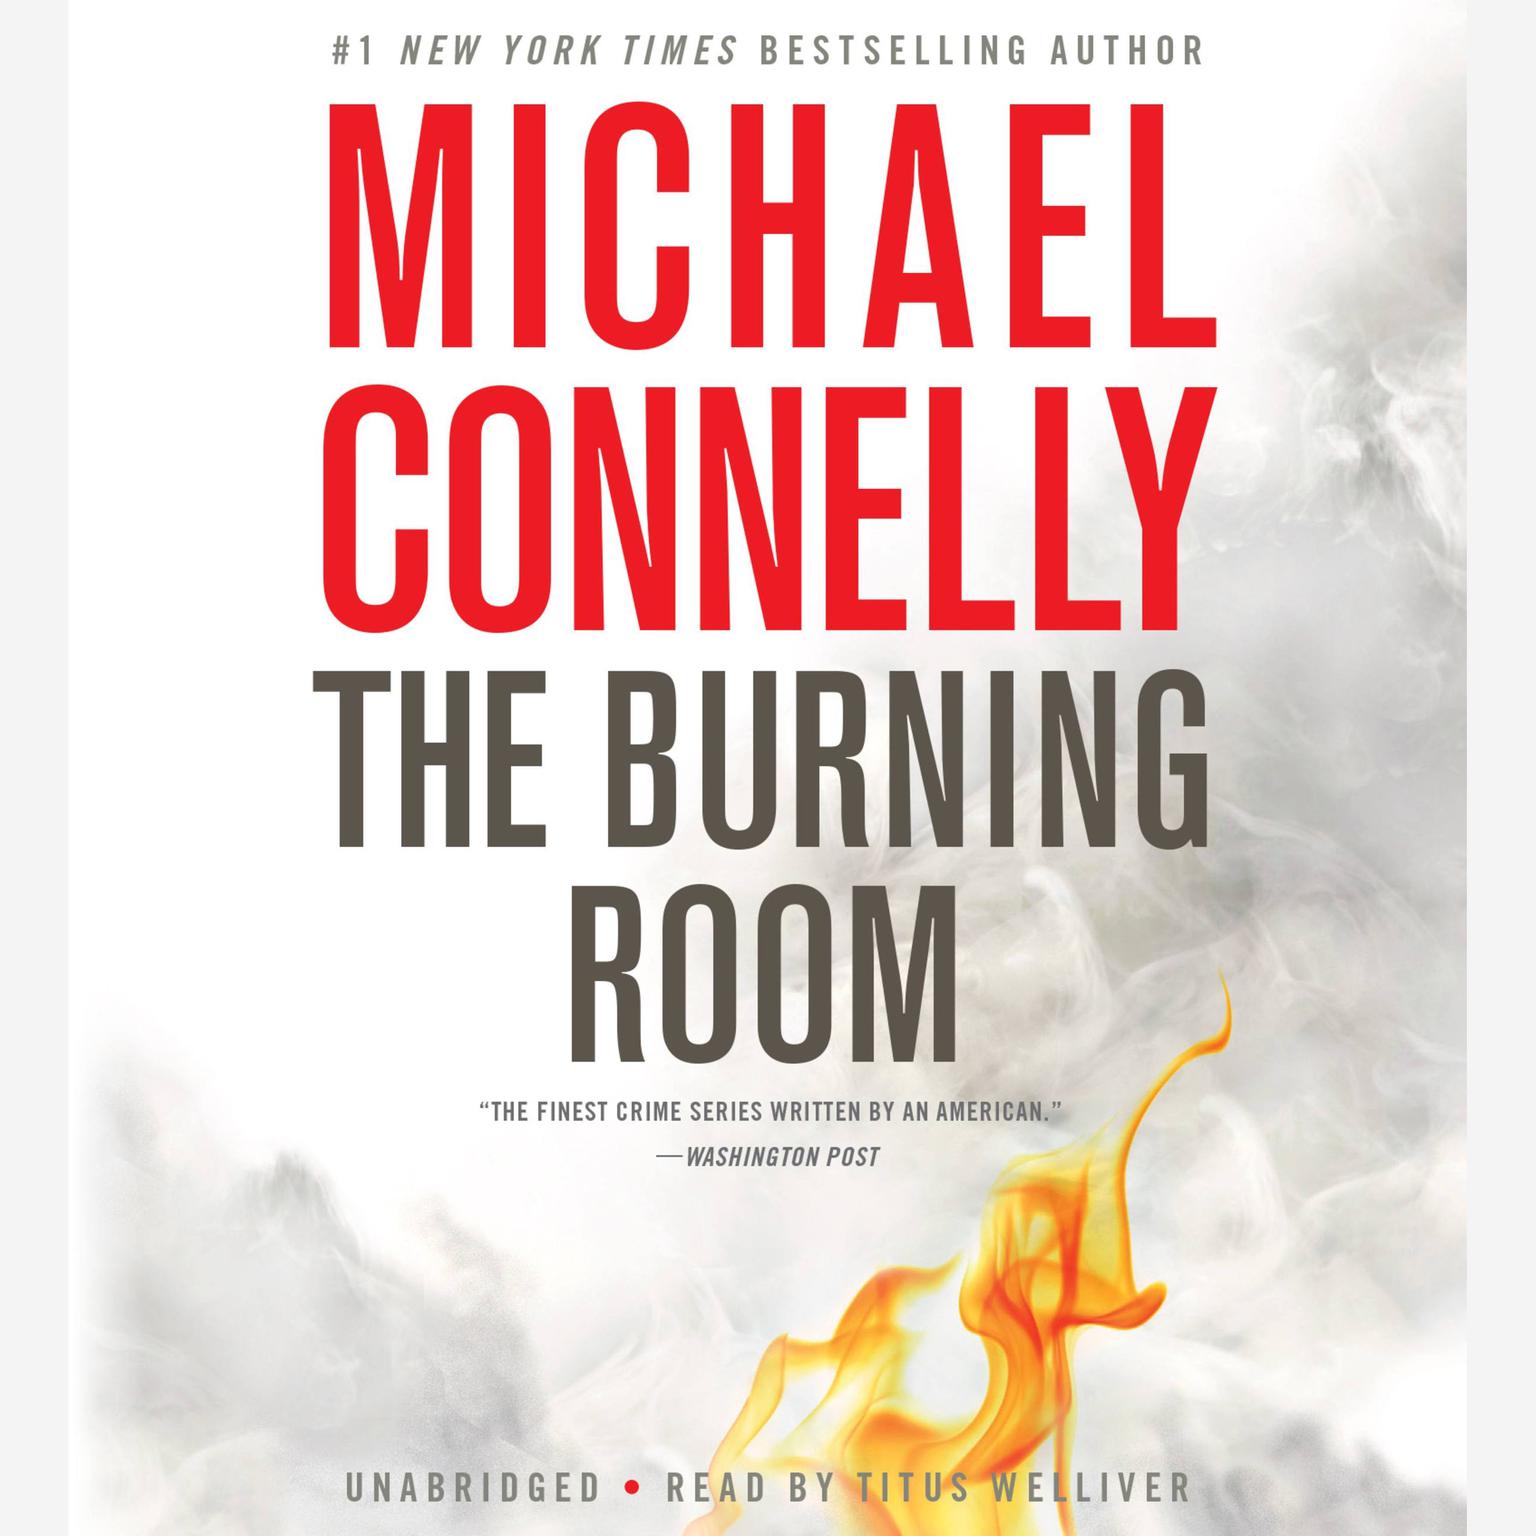 The Burning Room Audiobook, by Michael Connelly